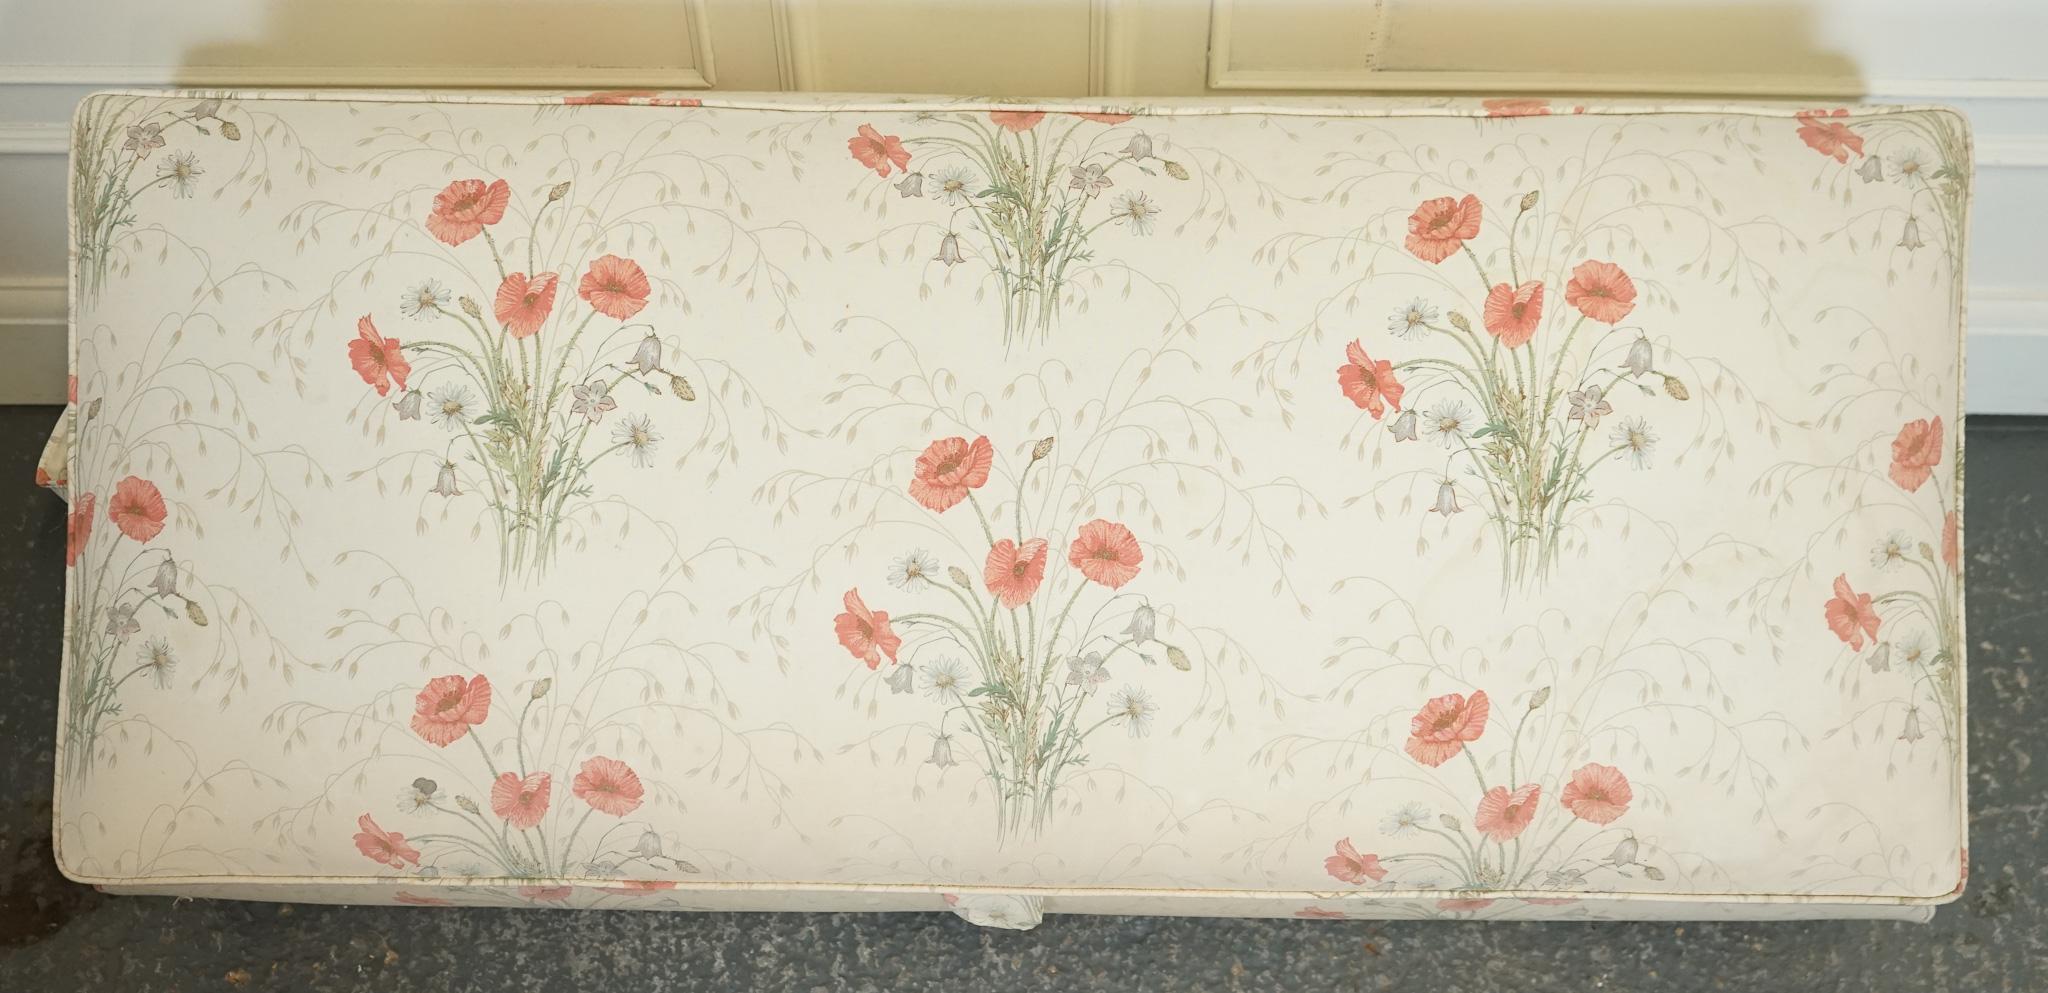 LARGE ANTIQUE VICTORIAN POPPY FLOWER PATTERN FABRiC OTTOMAN CHEST TRUNK  J1 For Sale 1